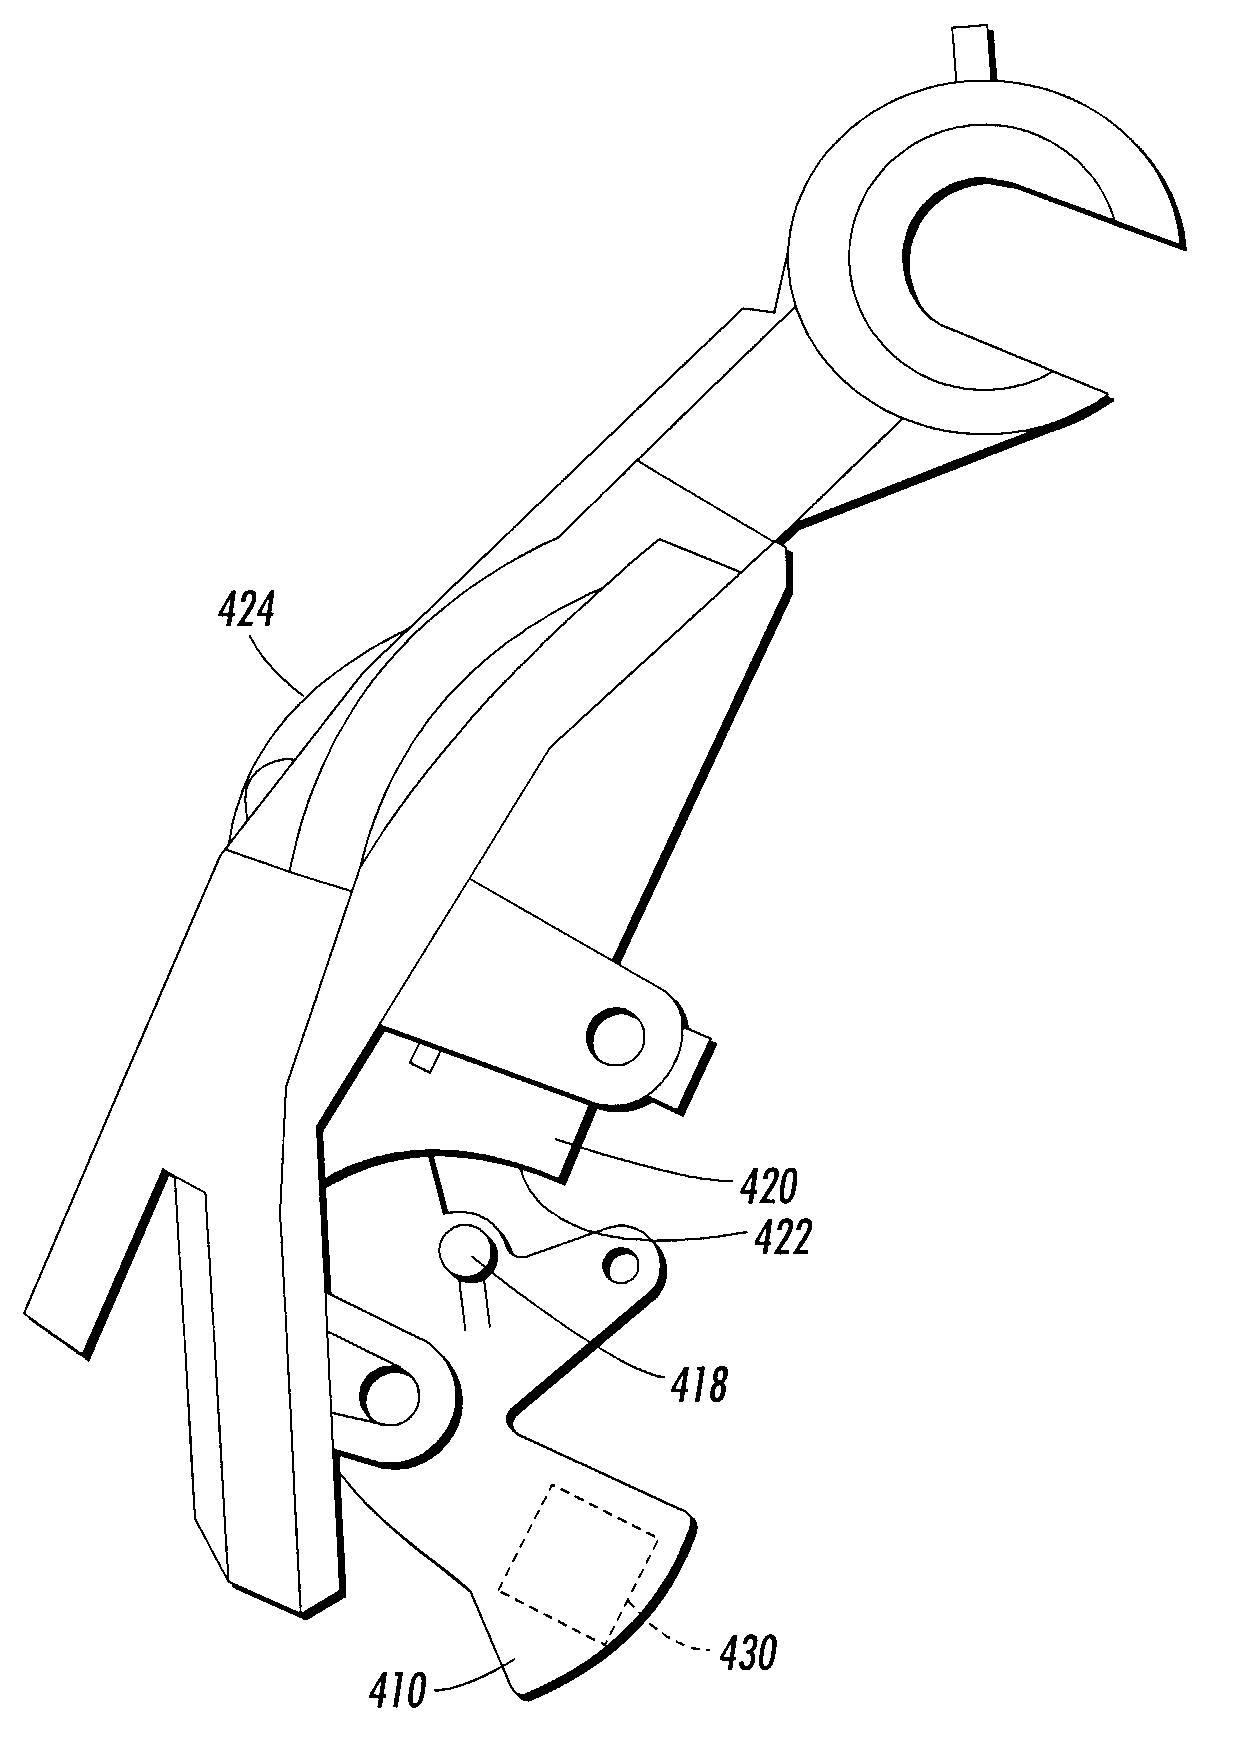 Systems and methods for detecting bi-directional passage of an object via an articulated flag member arrangement